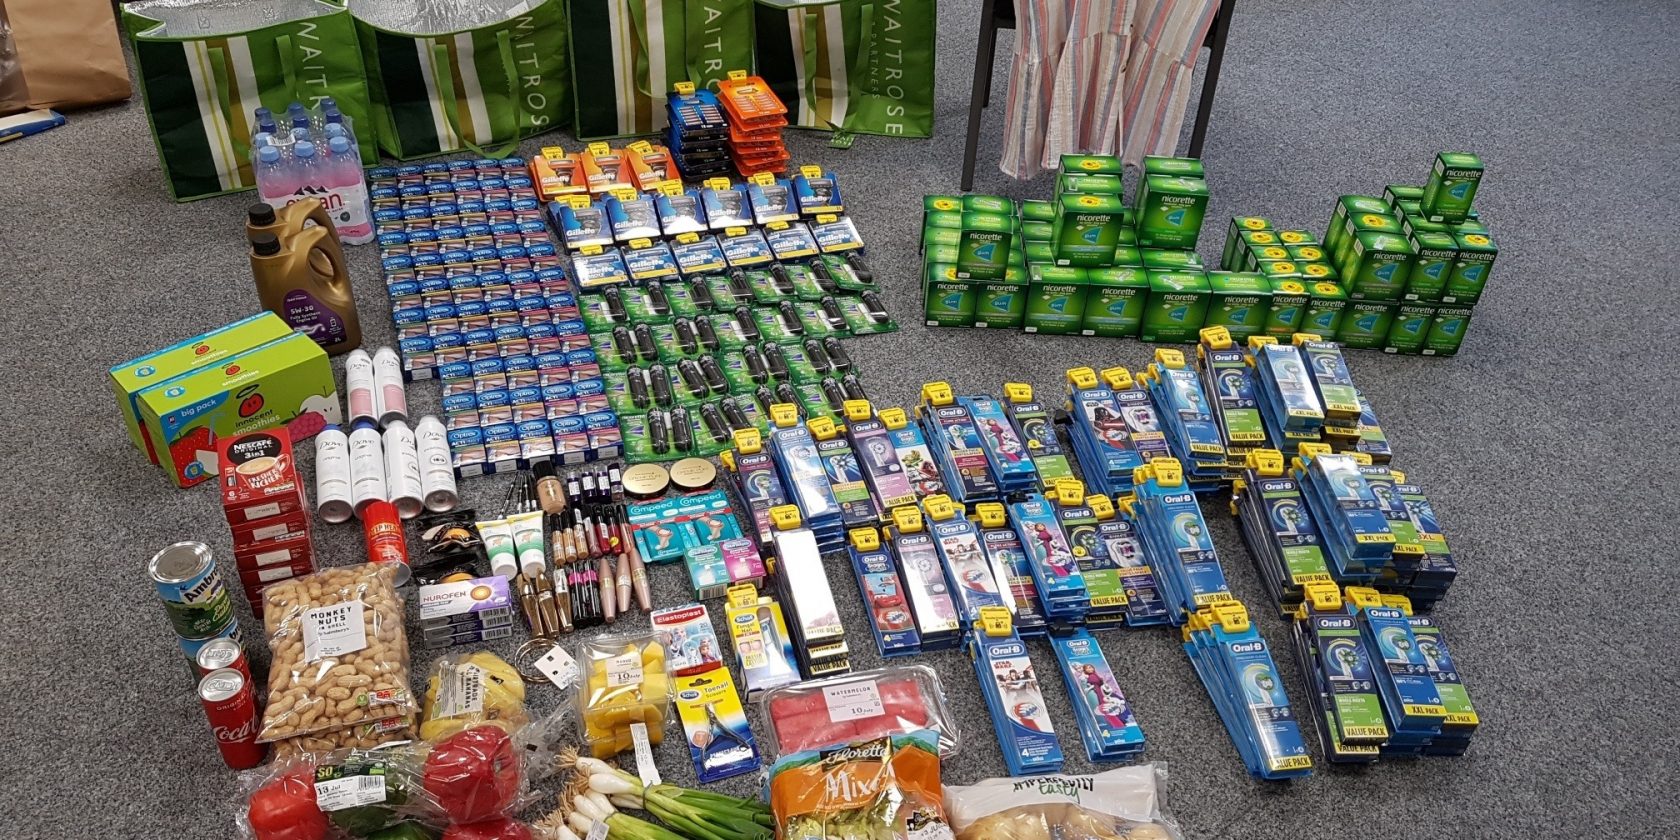 Shoplifting Pair Caught By Police After Carrying Out £800 Supermarket Sweep Across North Wales